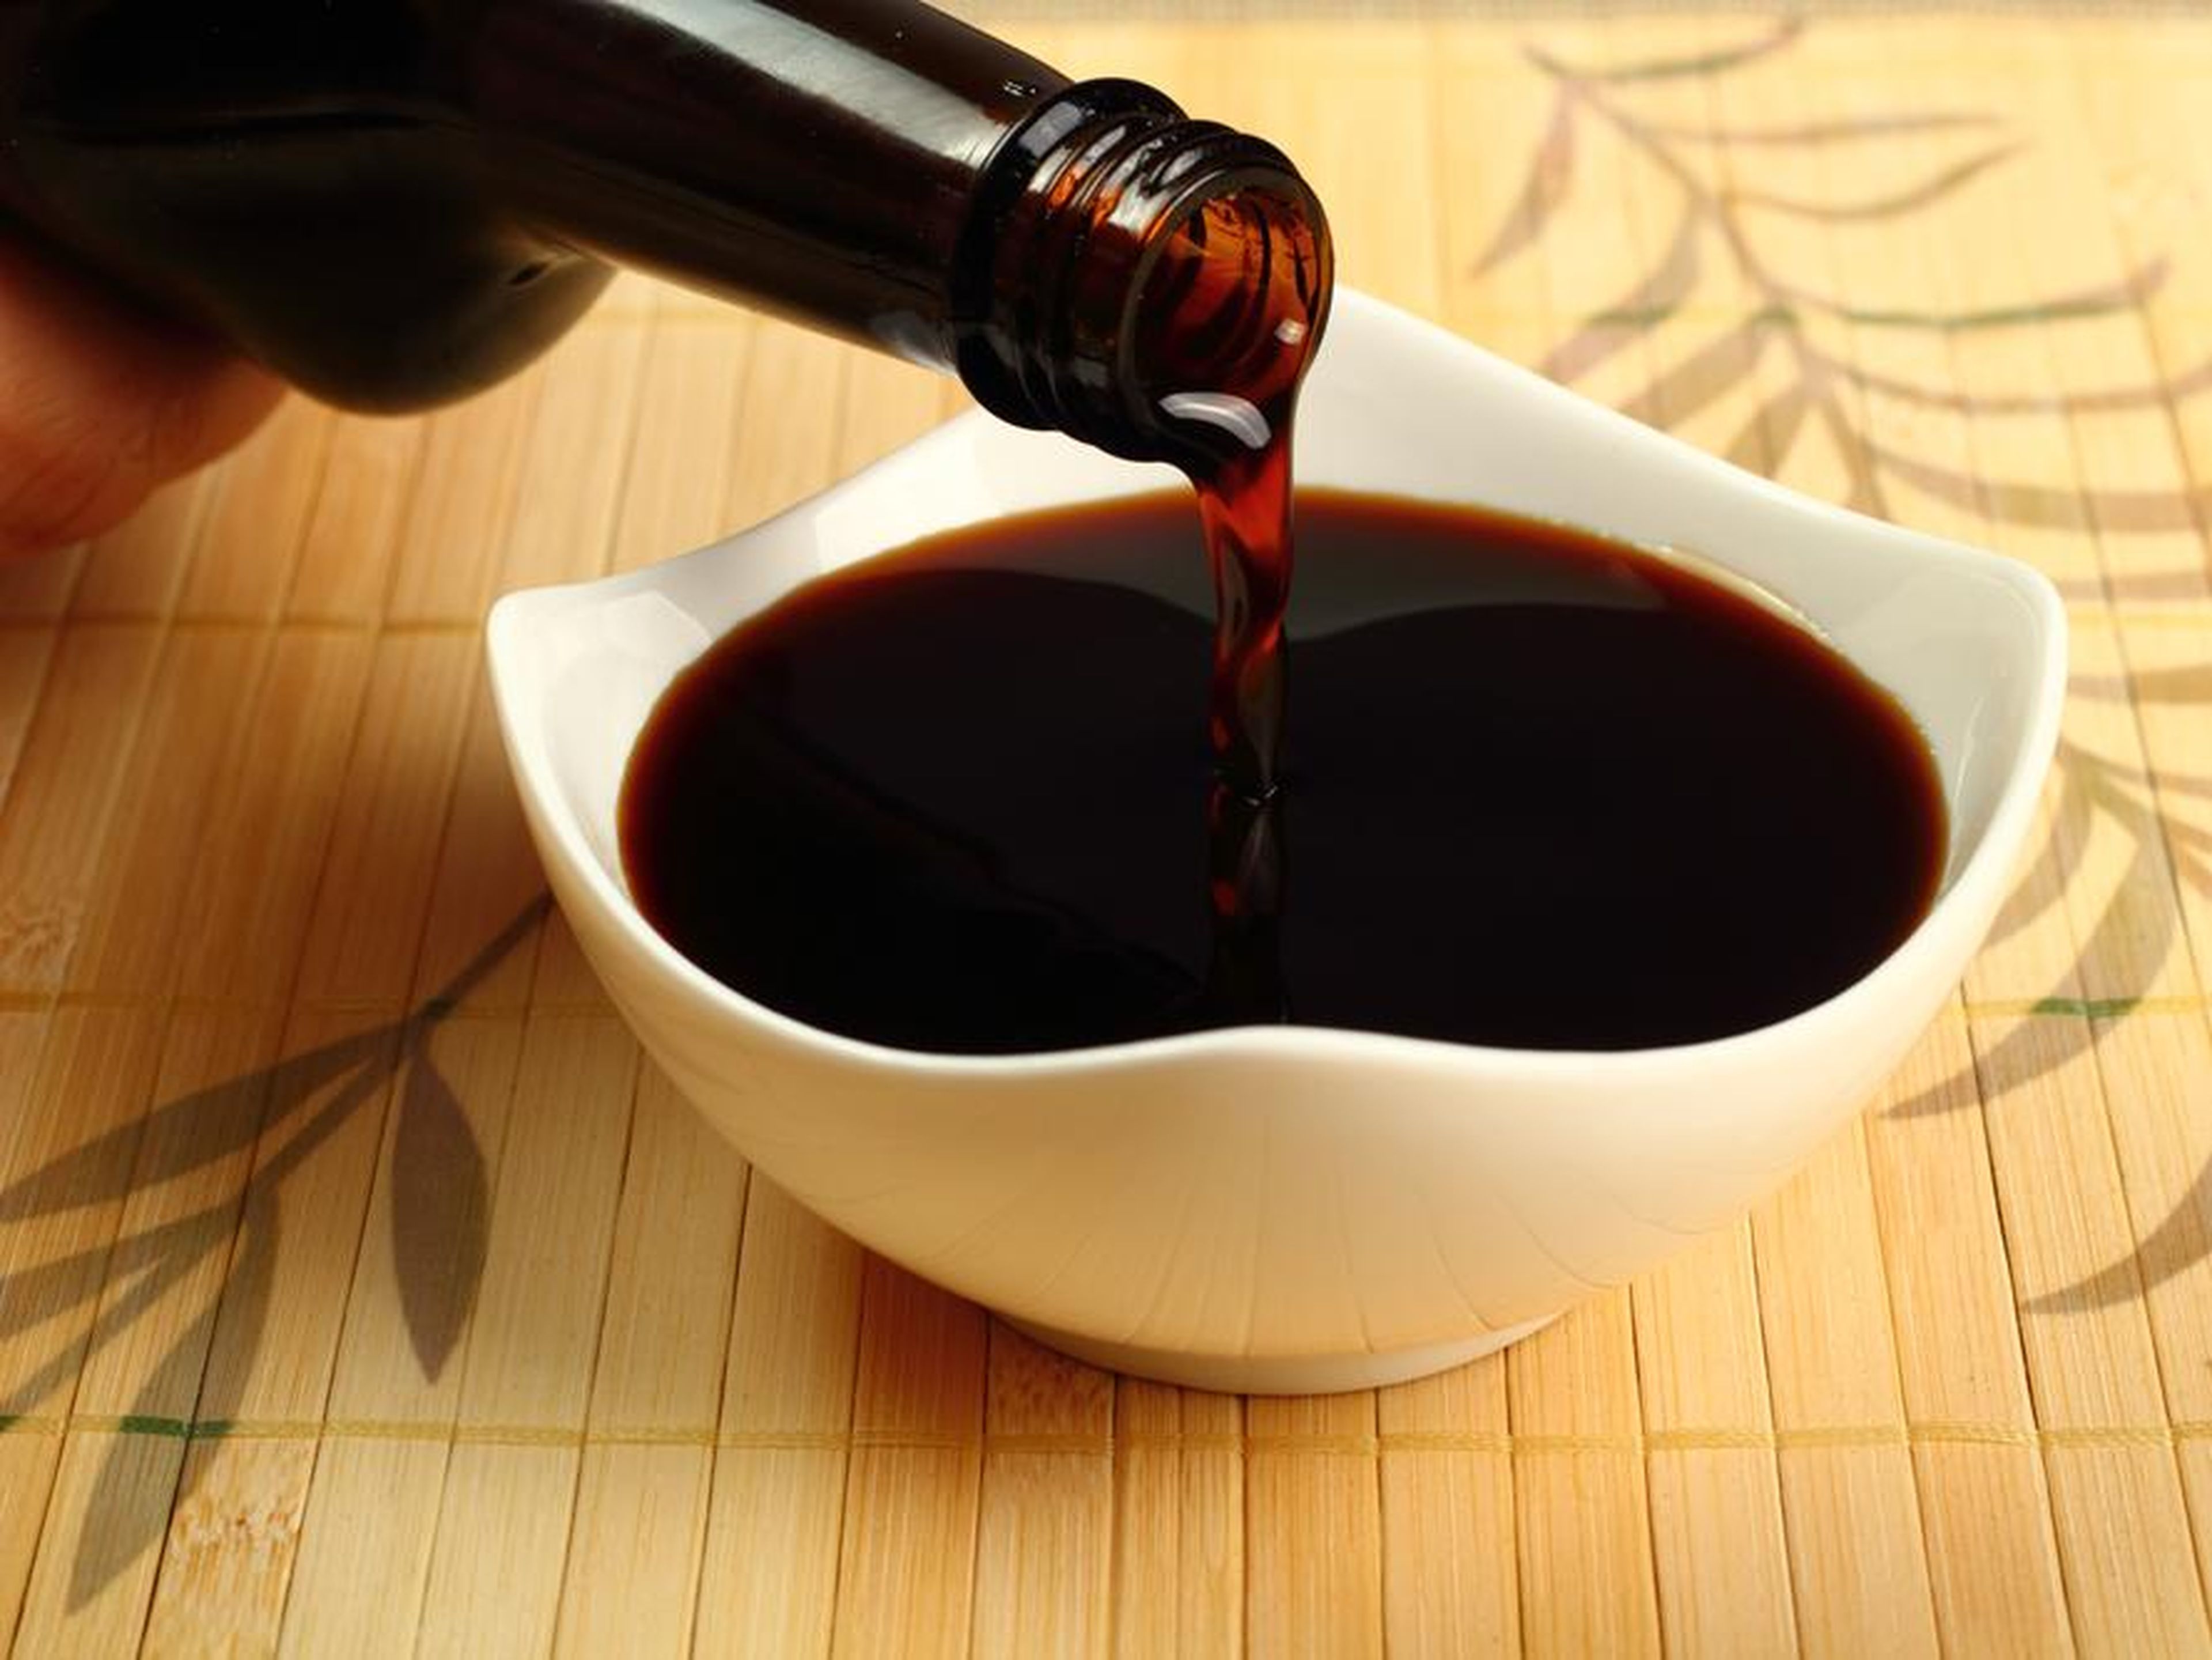 Traditionally made soy sauce has a more complex flavor and takes years to make.